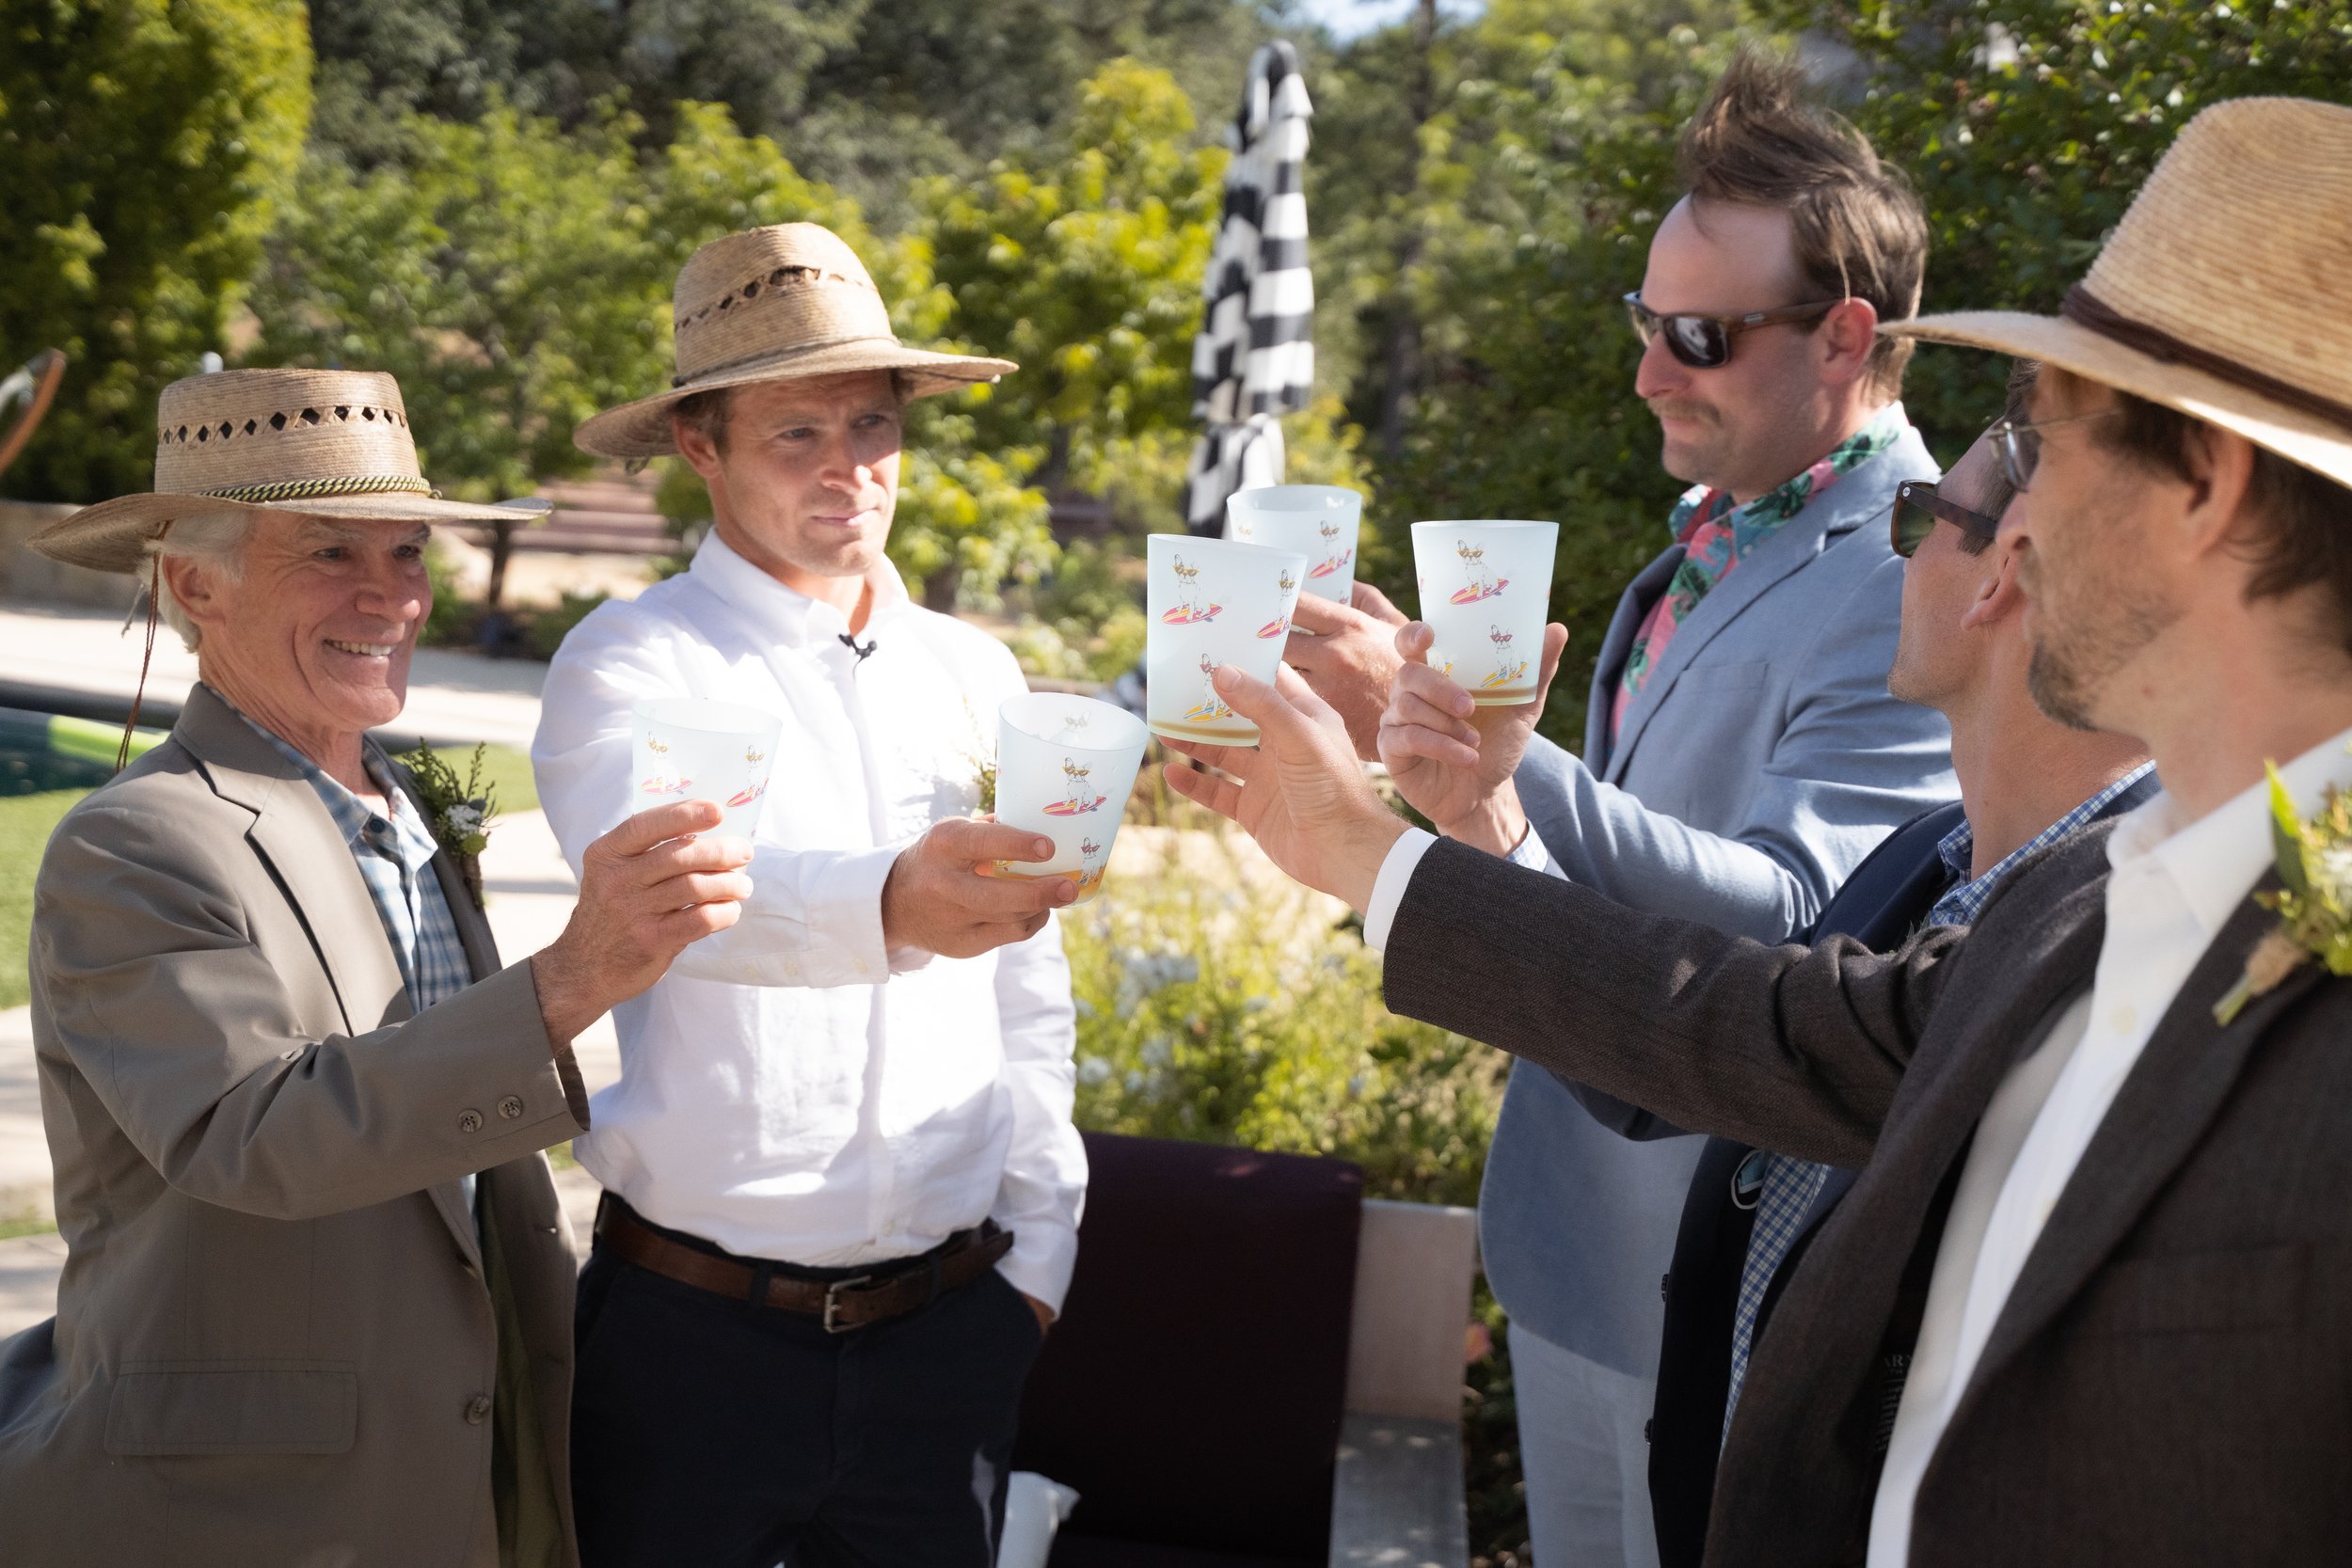 www.santabarbarawedding.com | Events by Fran | Jacob Grant Photography | Shiela Morales | Groom Having a Drink with Friends 